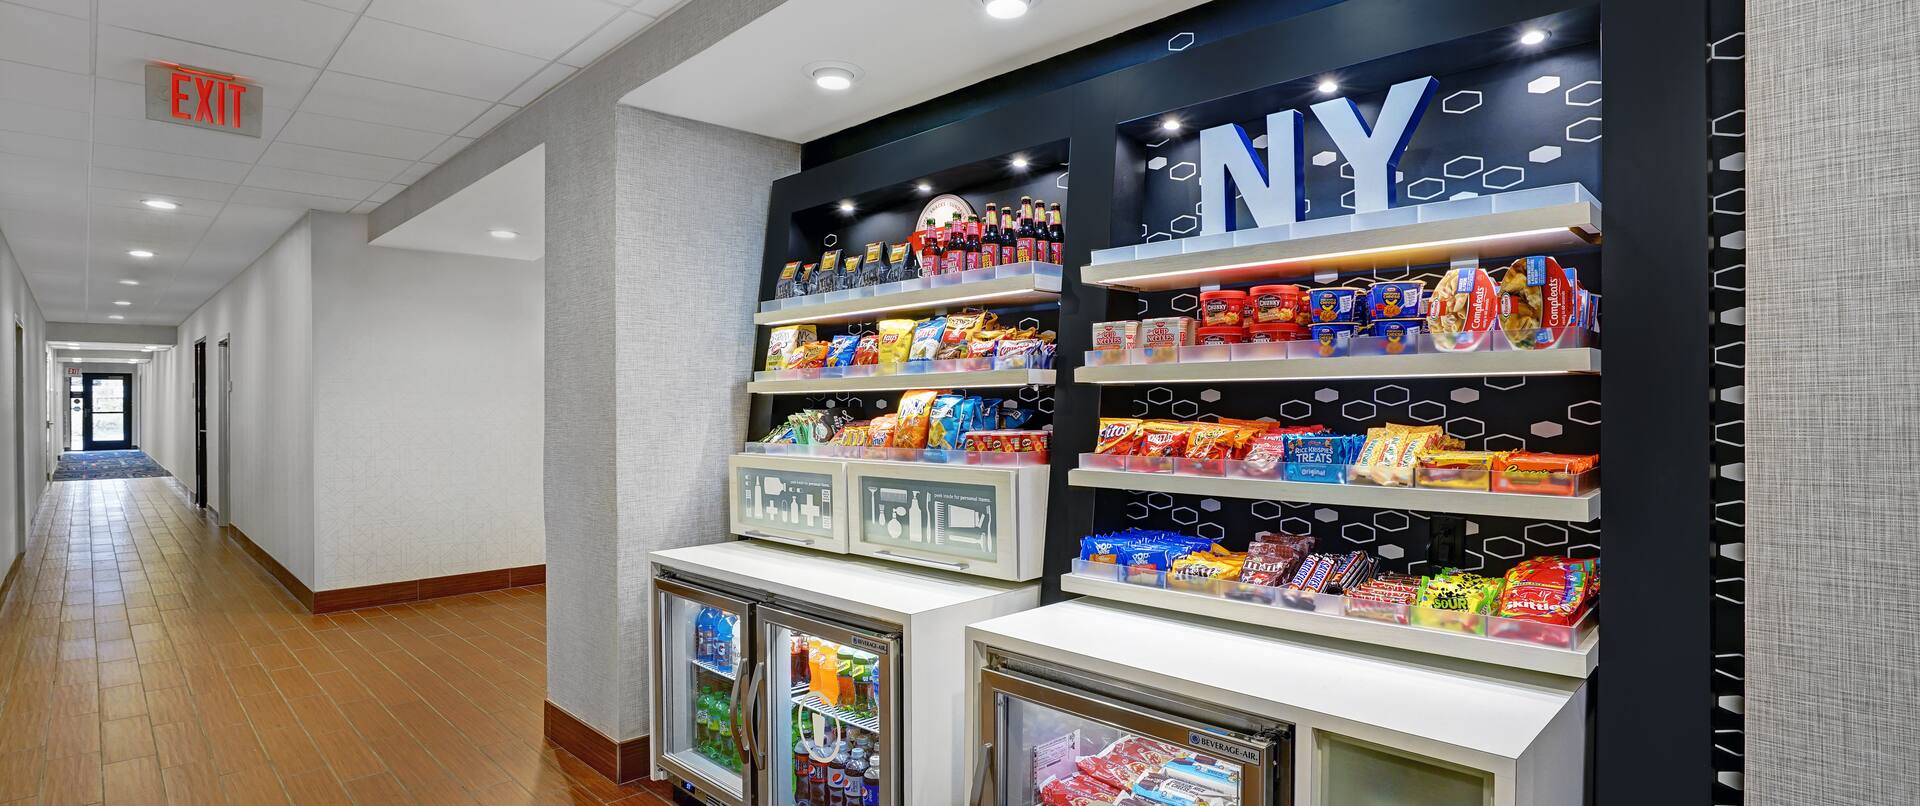 Treat area with snacks and fridges